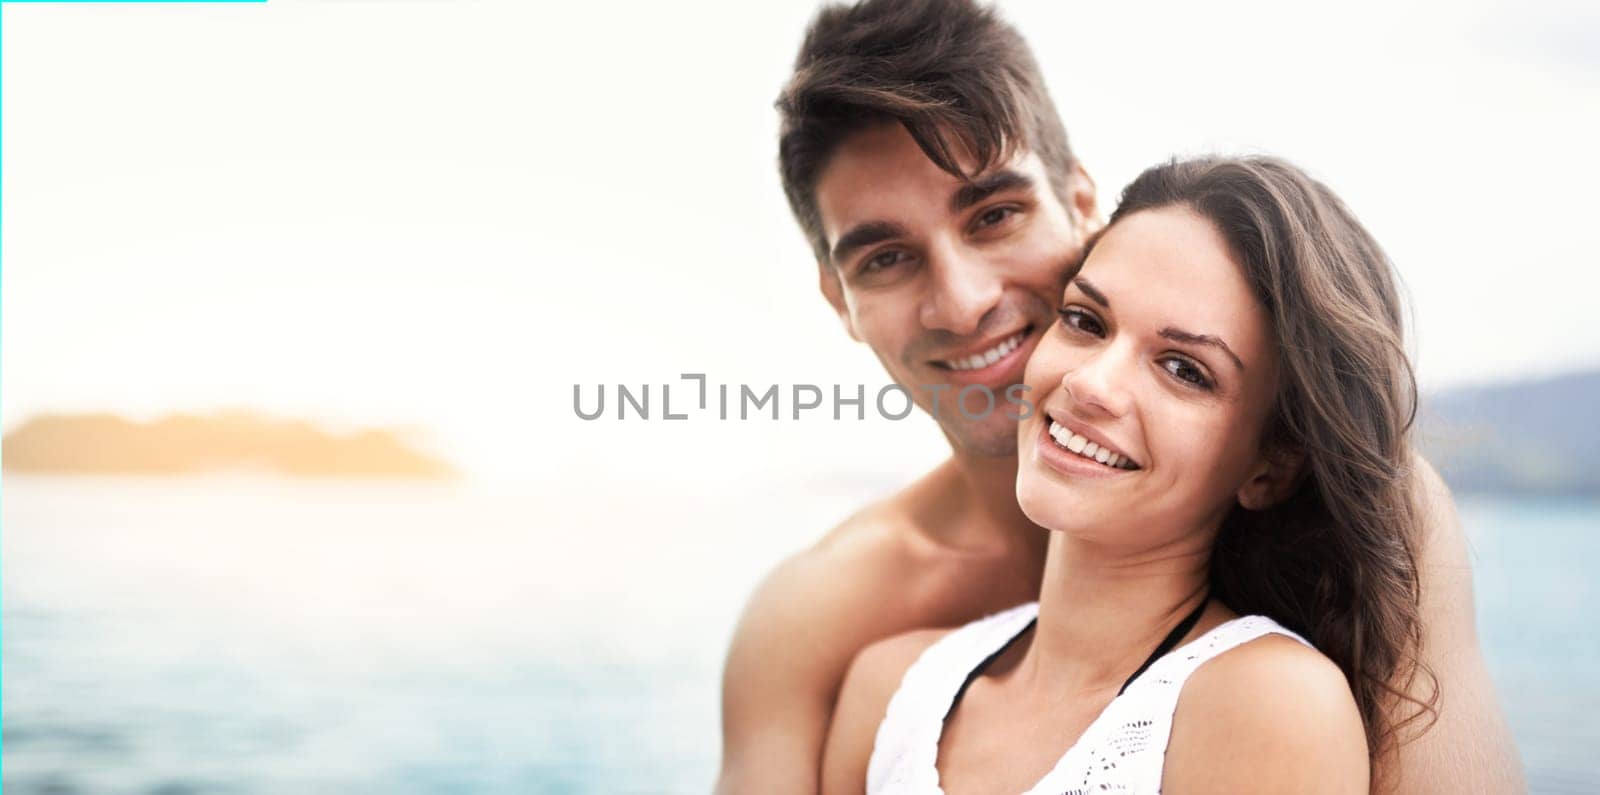 Love, portrait and happy couple at beach with care, security and bonding on vacation together. Nature, summer or young people or fun at sea for travel, holiday or adventure on romantic date in Spain by YuriArcurs